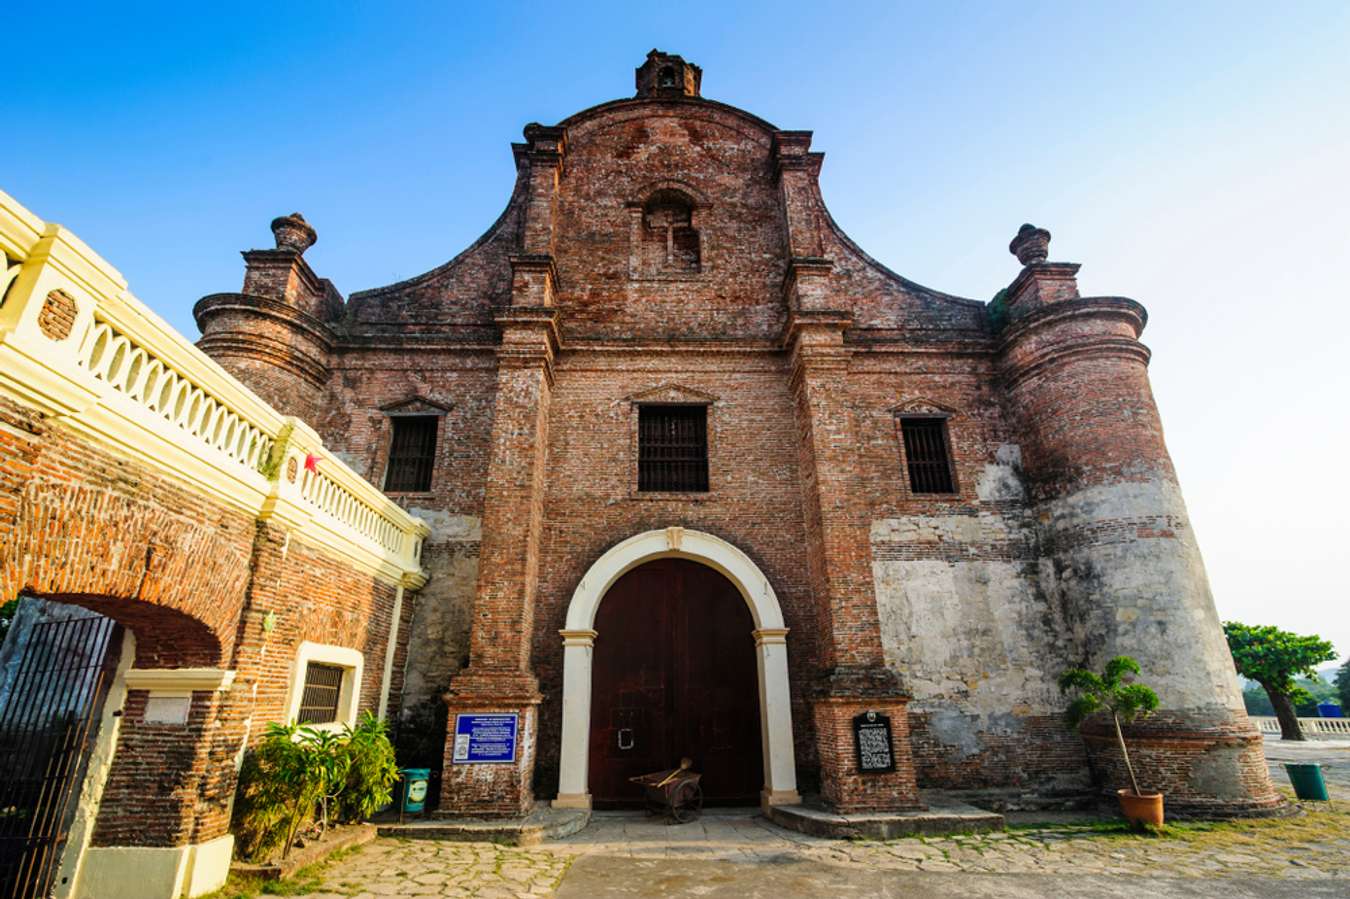 ilocos sur tourist attractions are the following